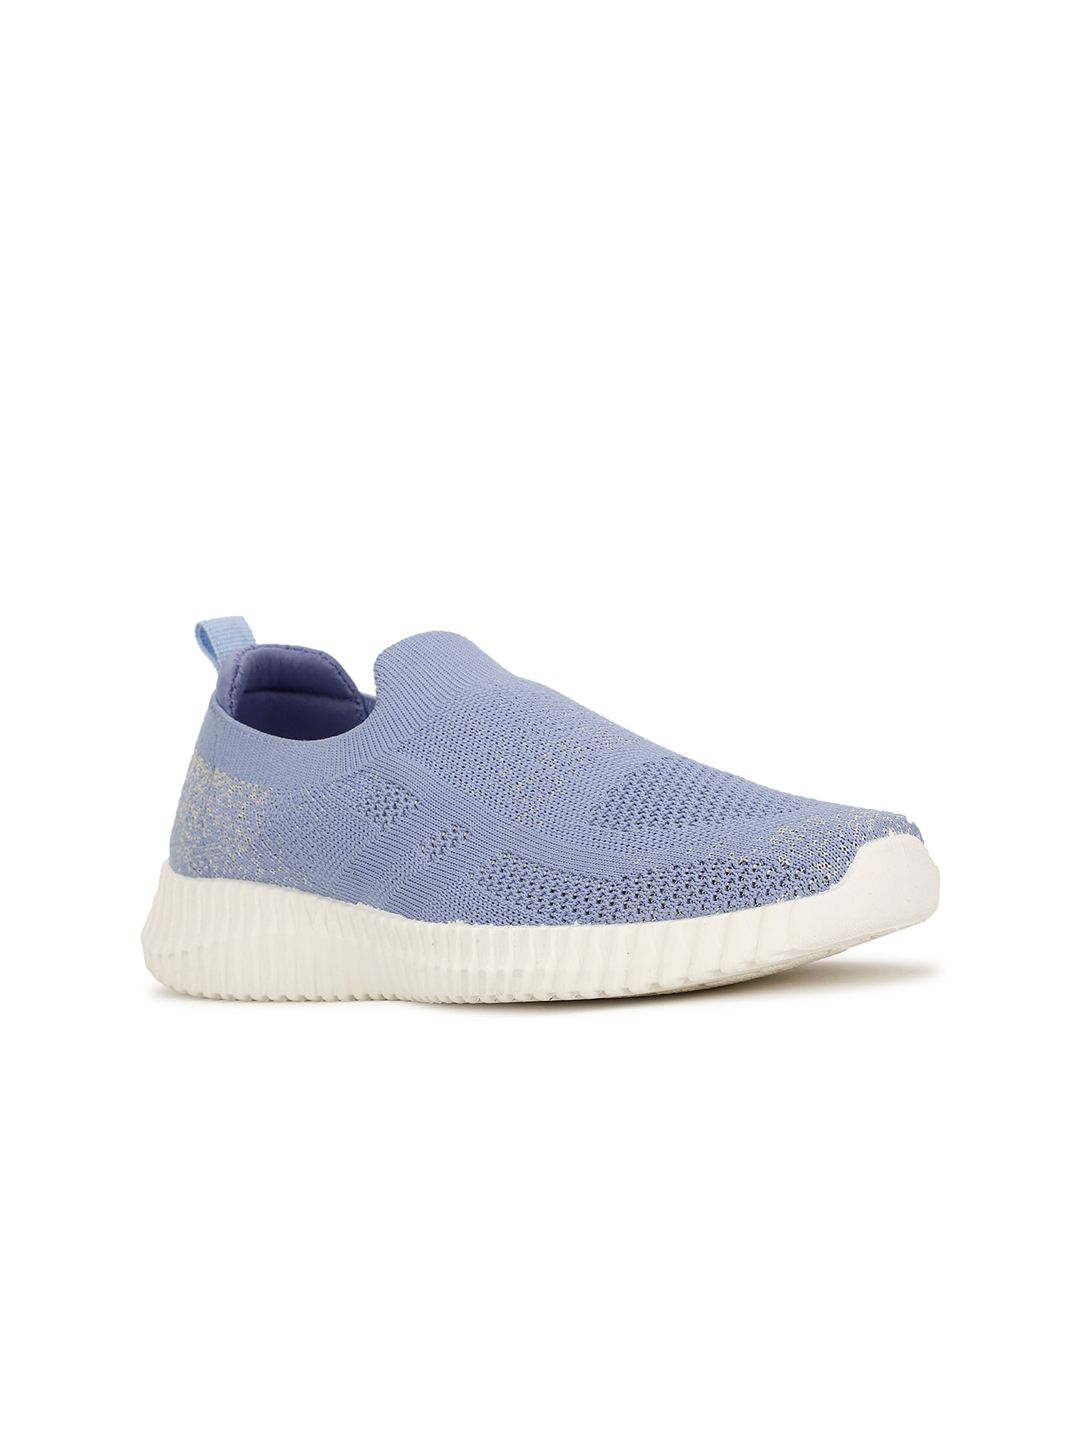 North Star Women Textured Slip-On Sneakers Price in India